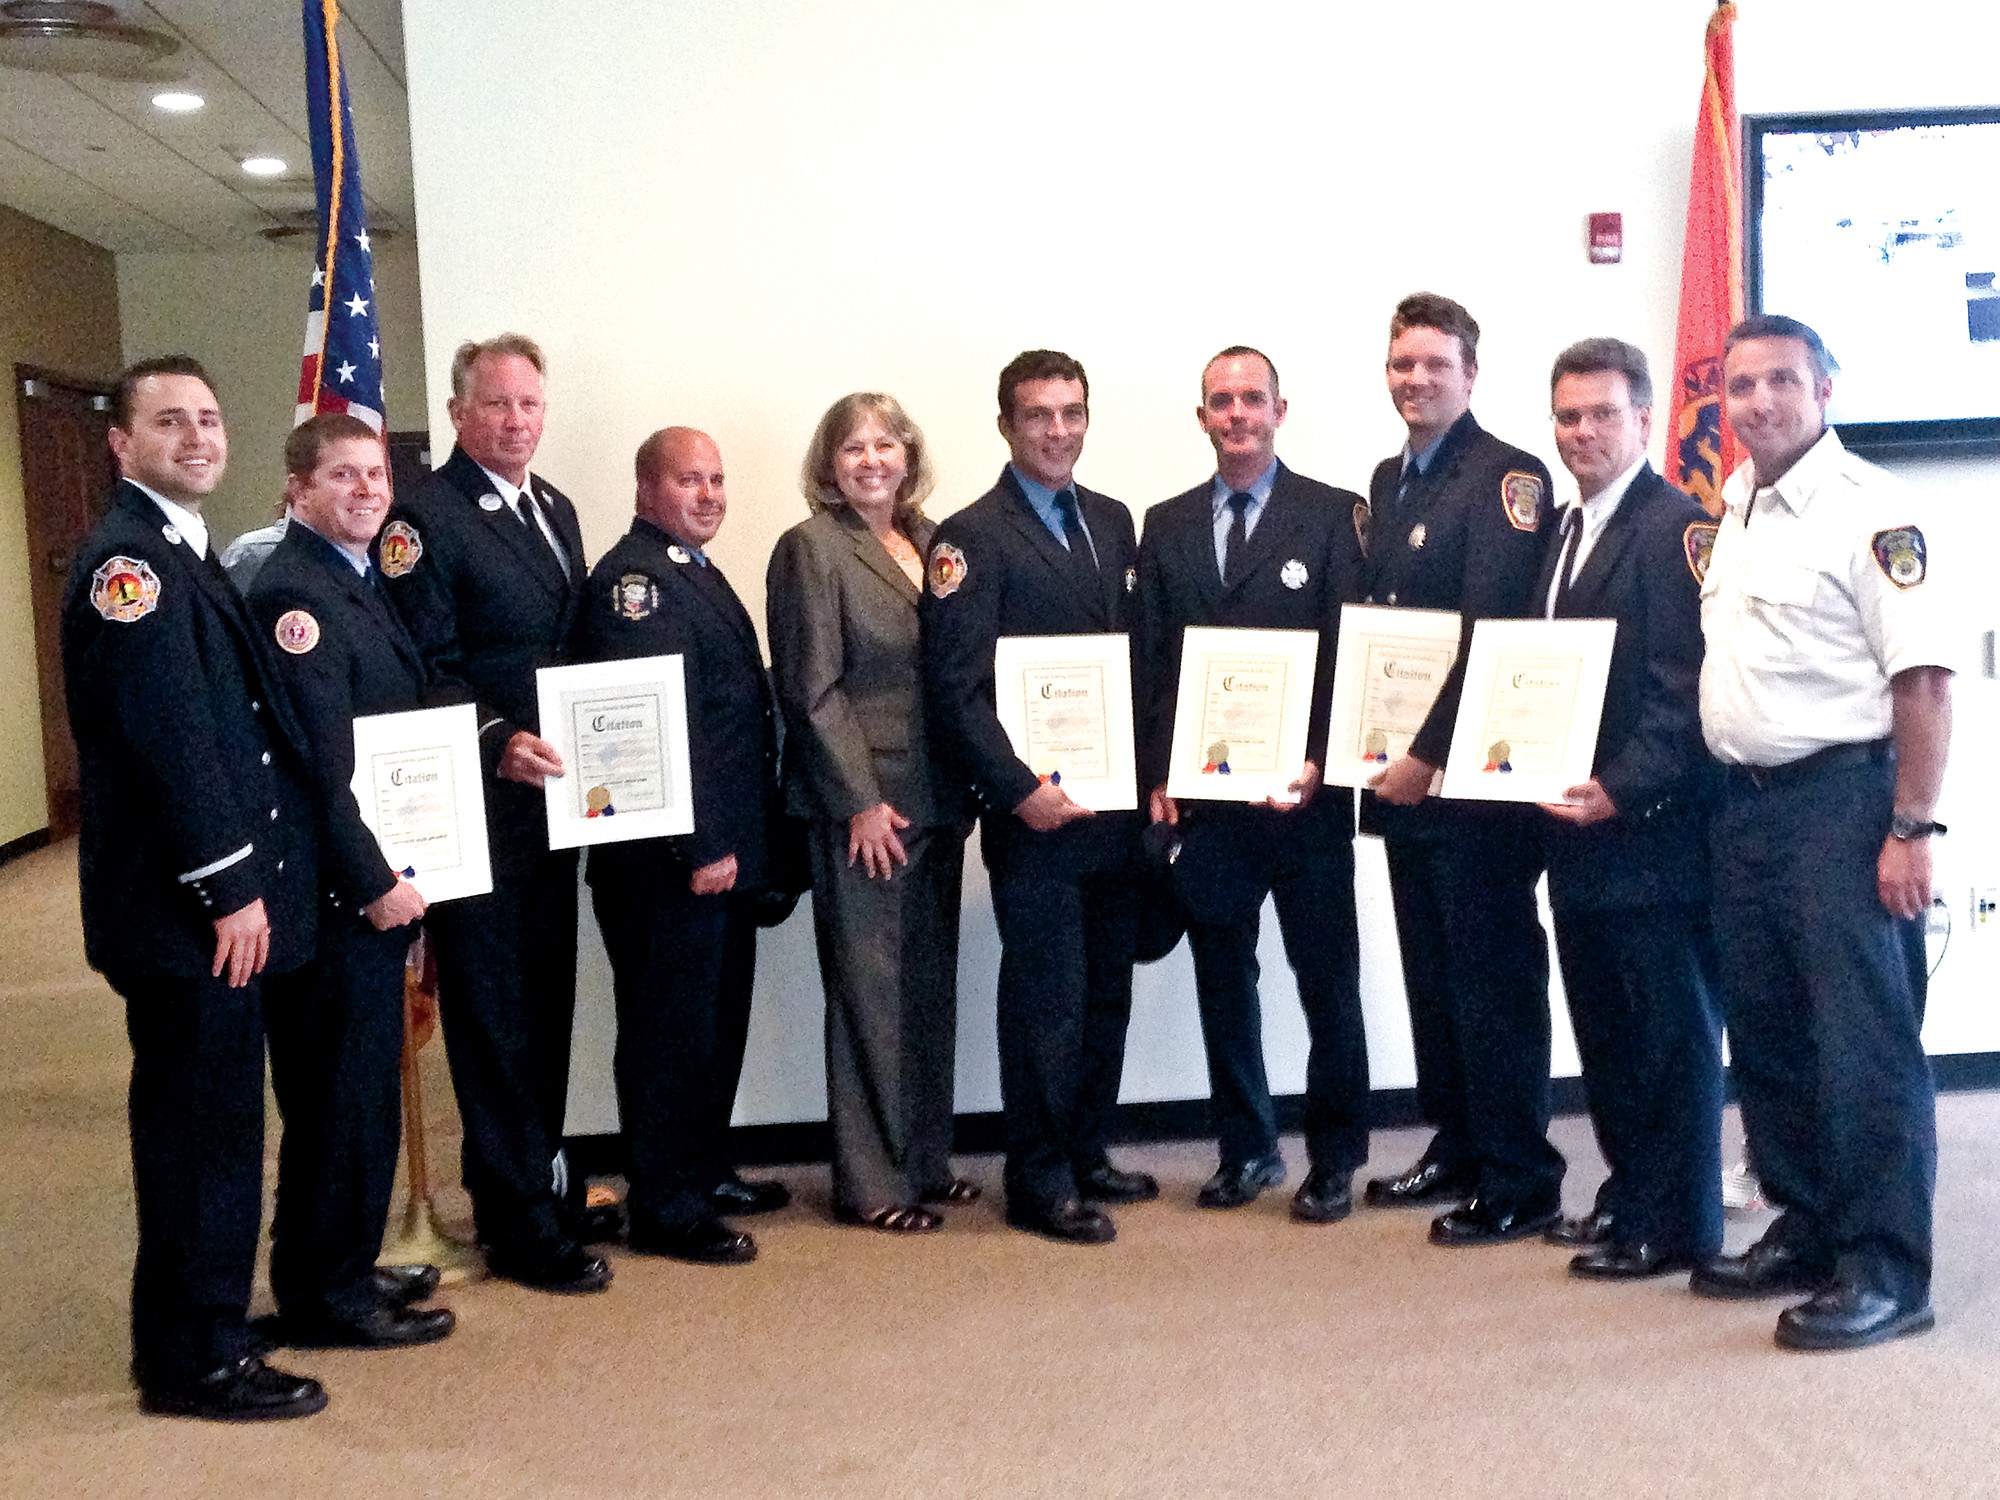 Long Beach firefighters Sam Pinto, far left, Brian Abramson, Brian Pues, John Marino, County Legislator Denise Ford, and firefighters Bryan Jones, Dan Fraser, Chris Koehle, Bill Piazza, and Anthony Fallon at the May 18 ceremony in Mineola.